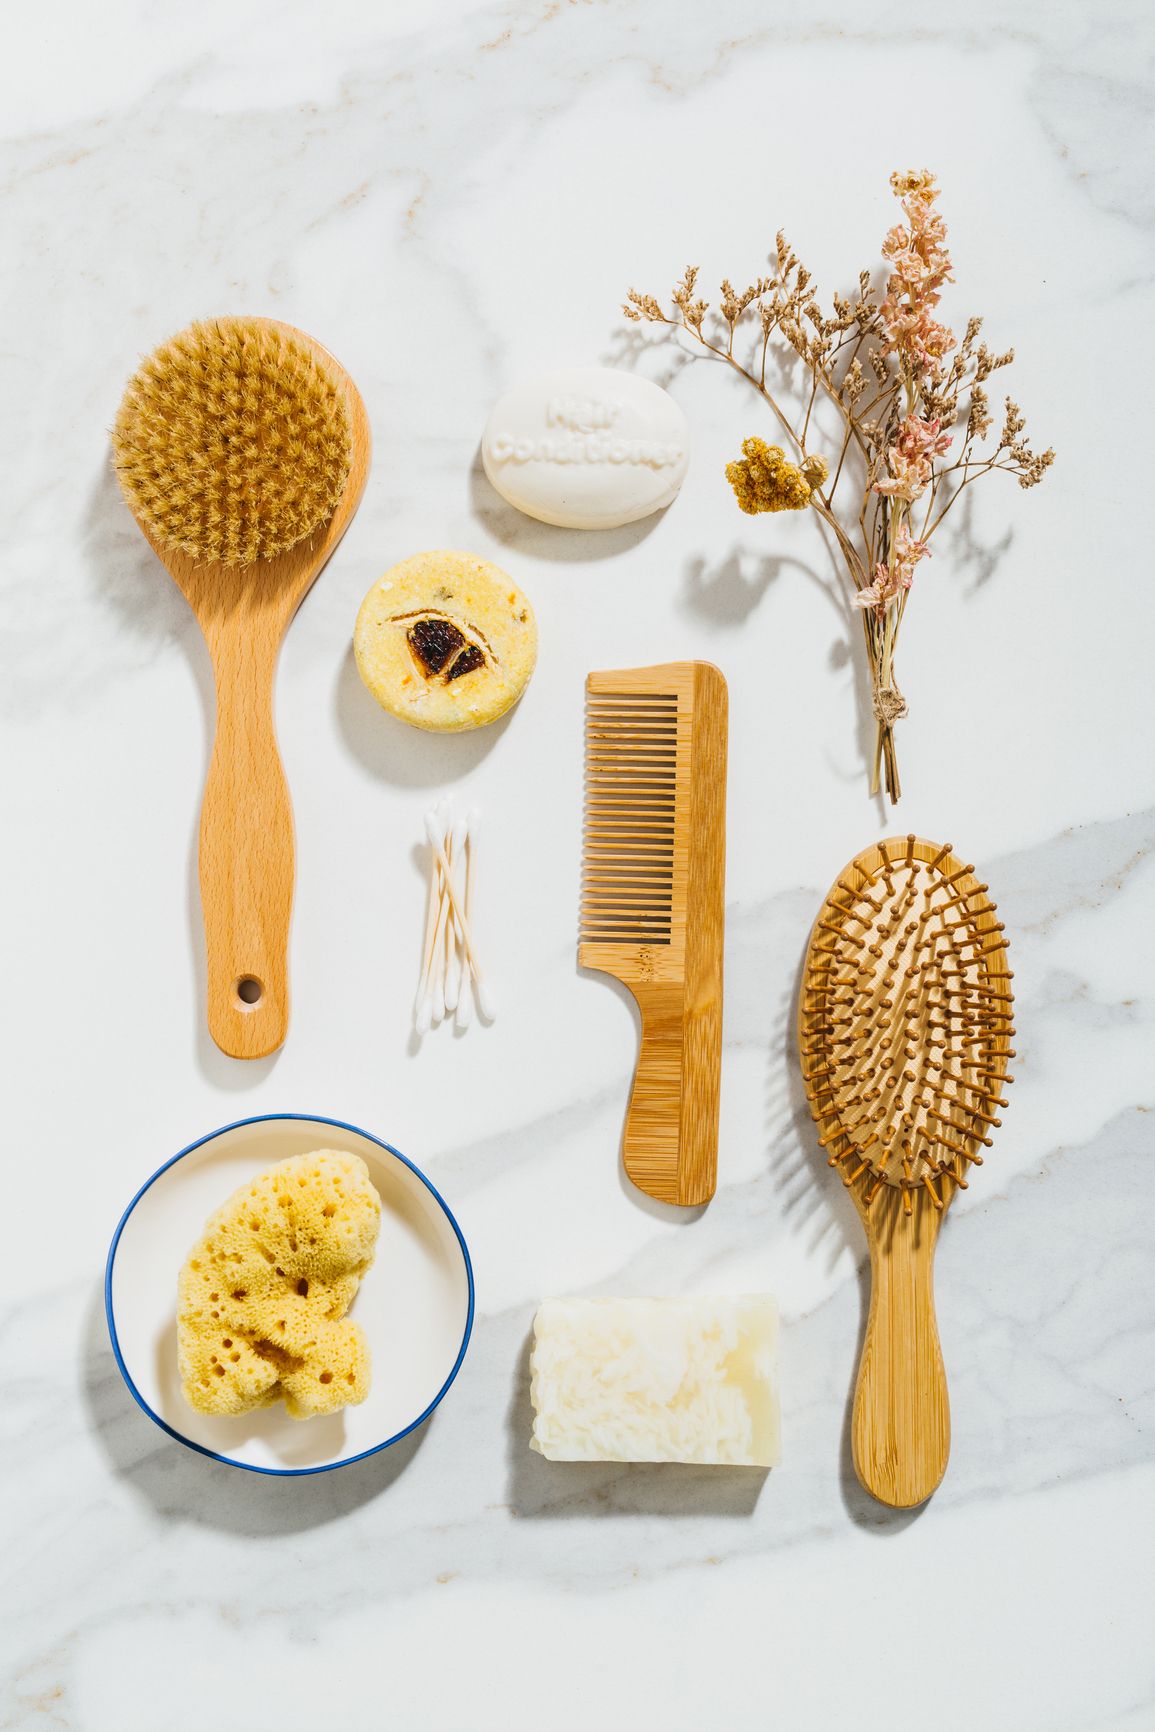 How To Clean Hairbrushes - Into The Gloss